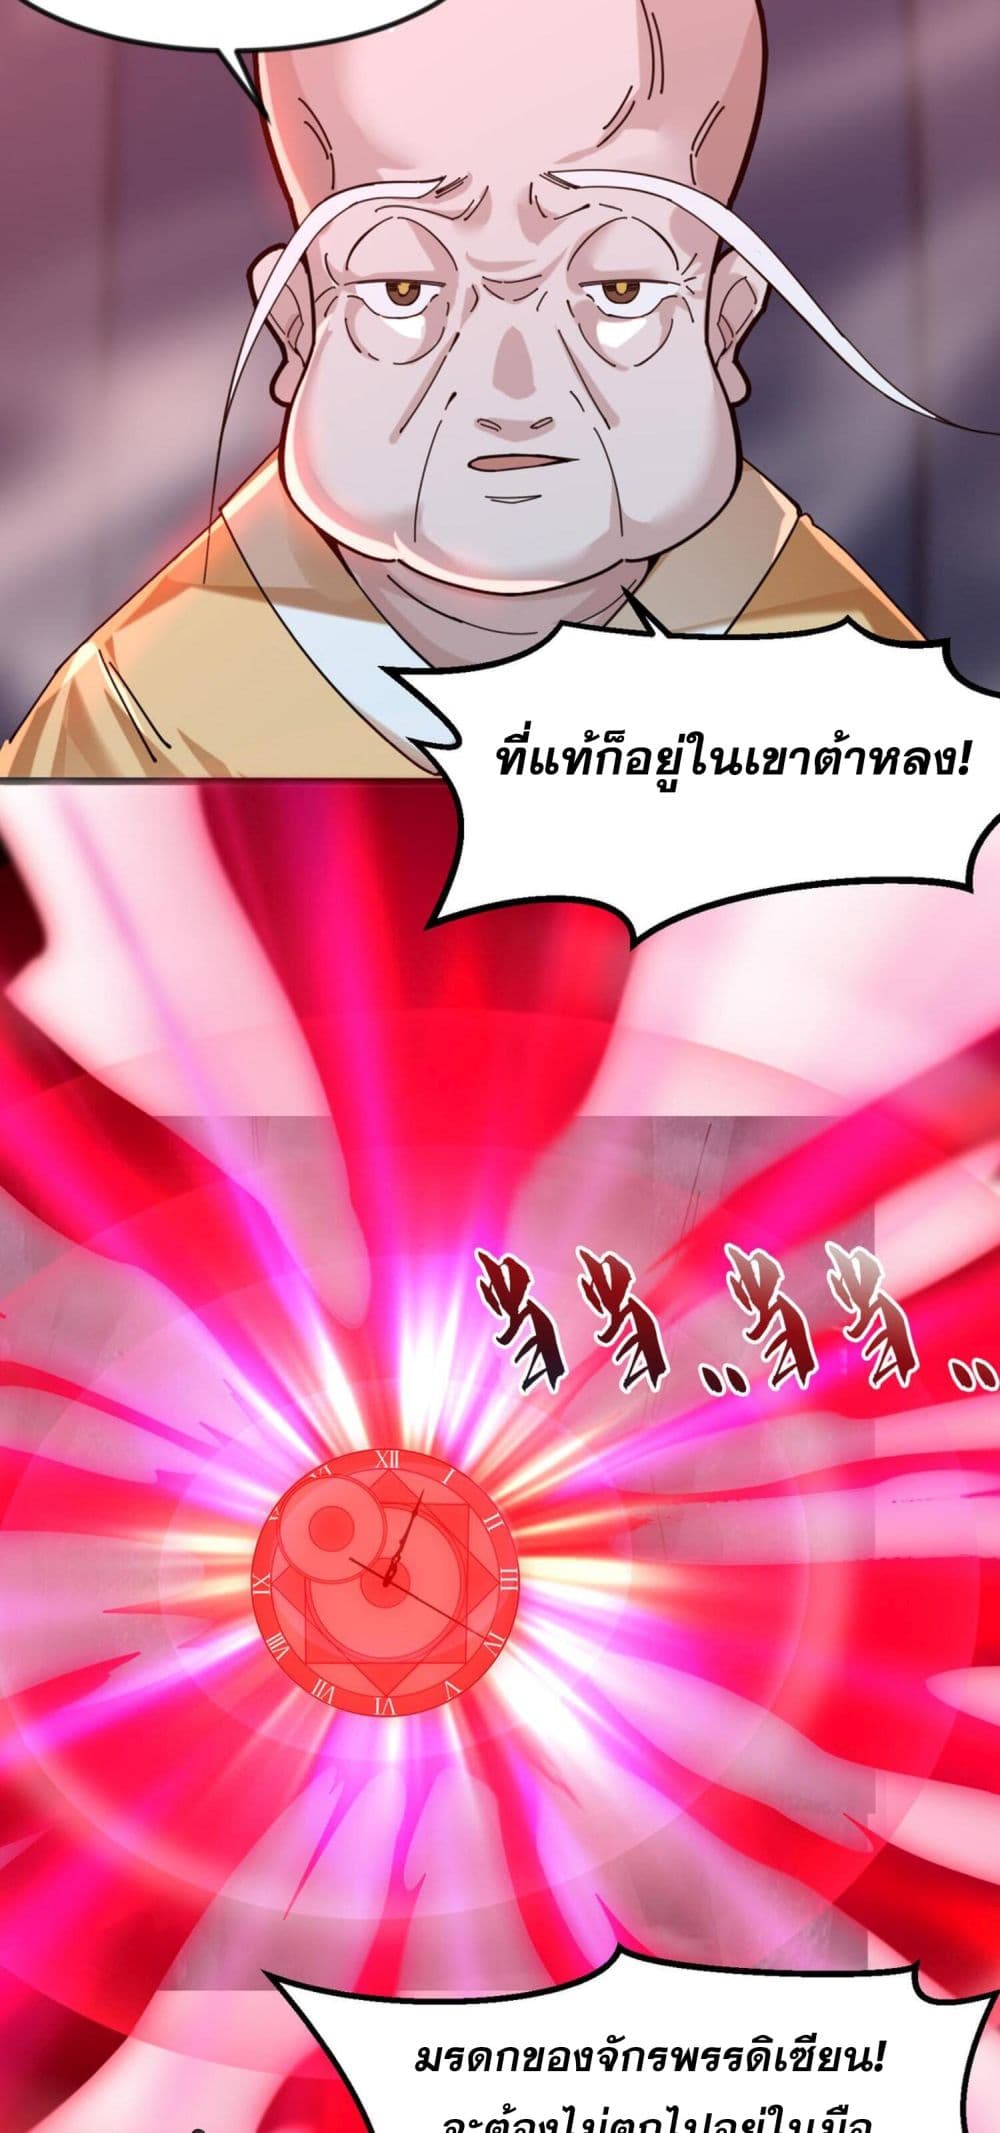 I Have Hundreds of Millions of Years of Cultivation ข้ามีพลังบำเพ็ญหนึ่งล้านปี 2-2